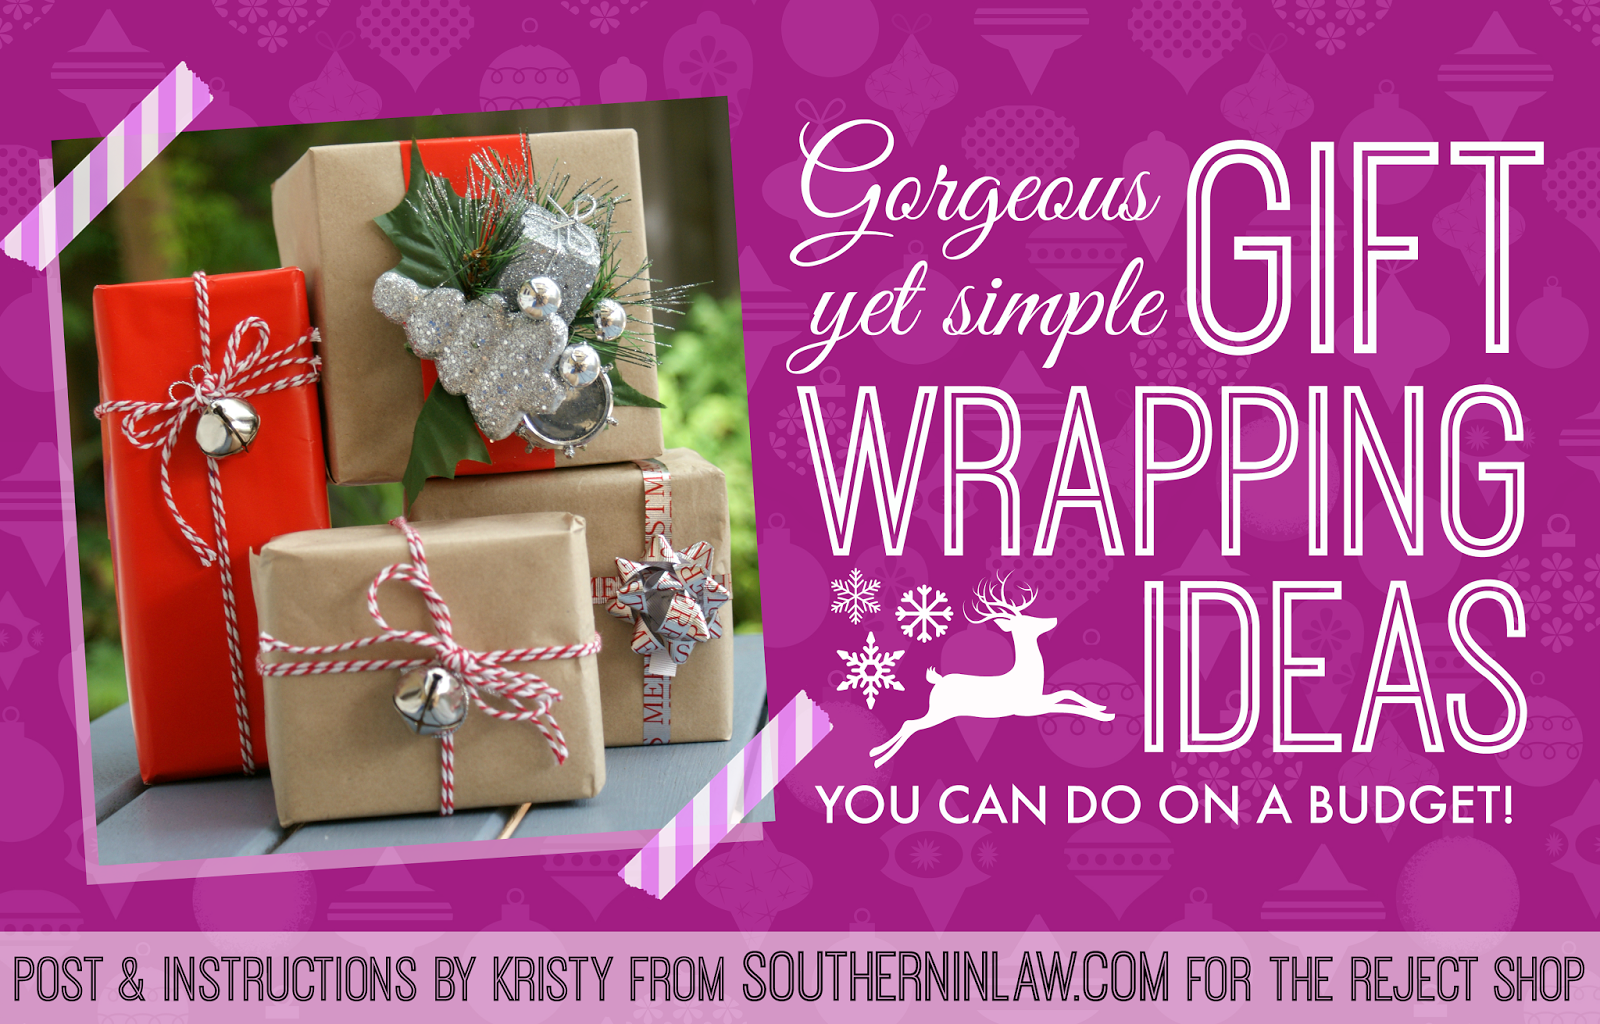 Southern In Law: DIY: Beautiful Gift Wrapping Ideas on a Budget